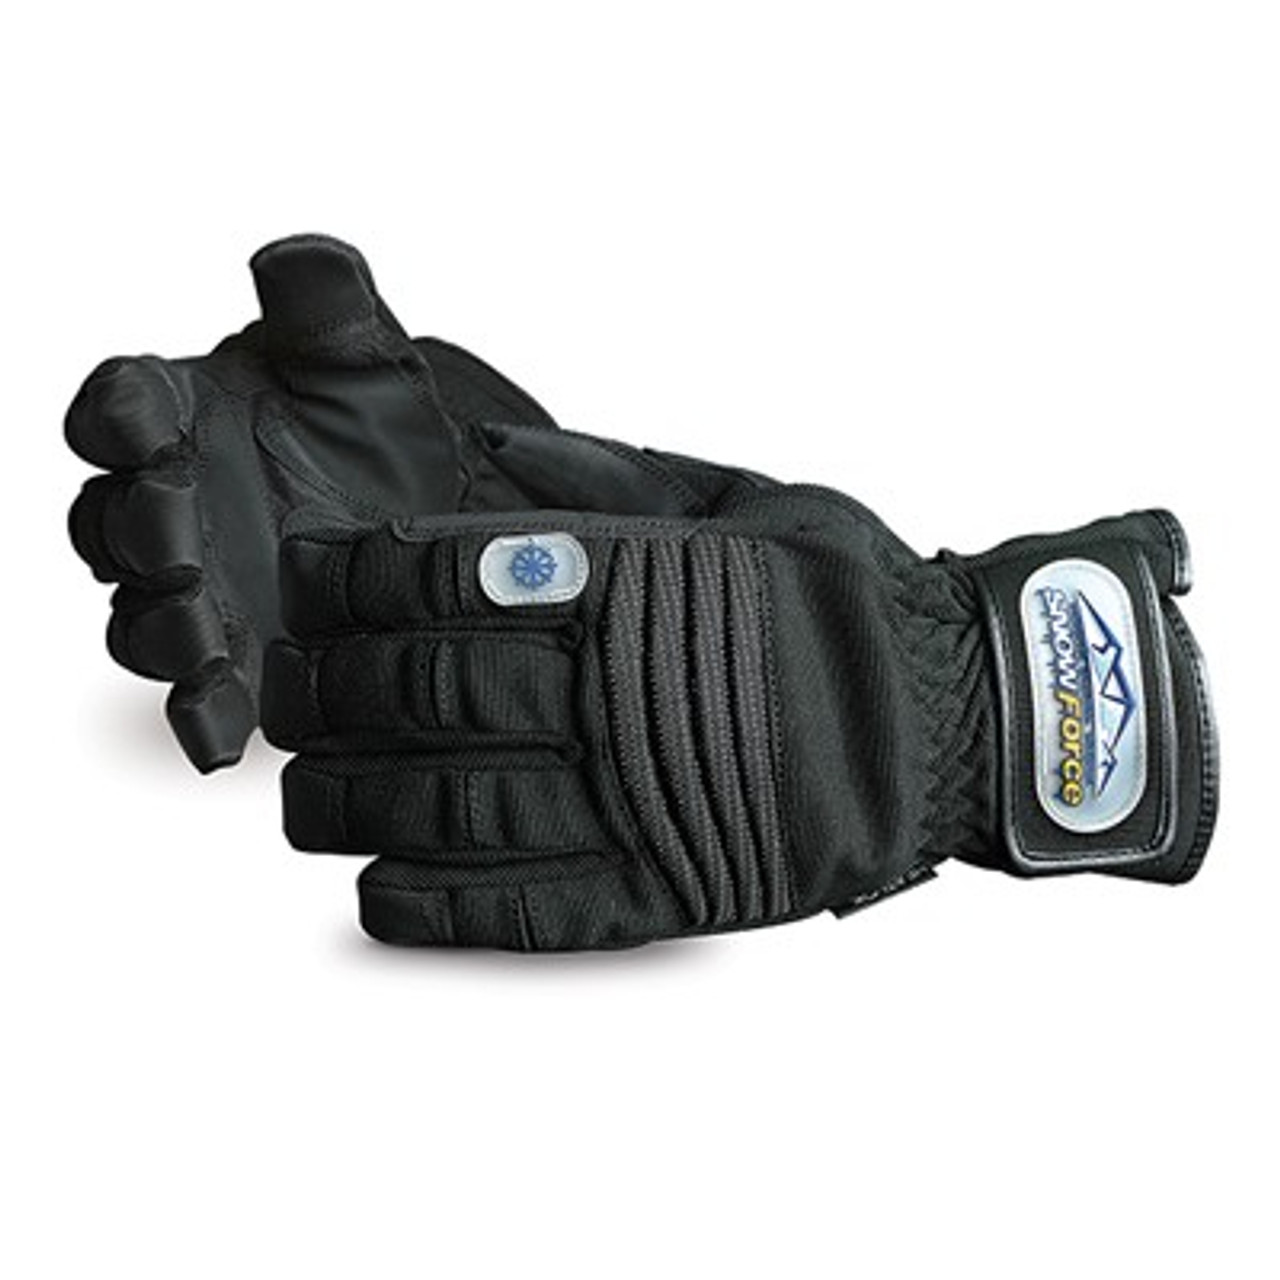 SteepGear Gloves: Superior Grip and Protection